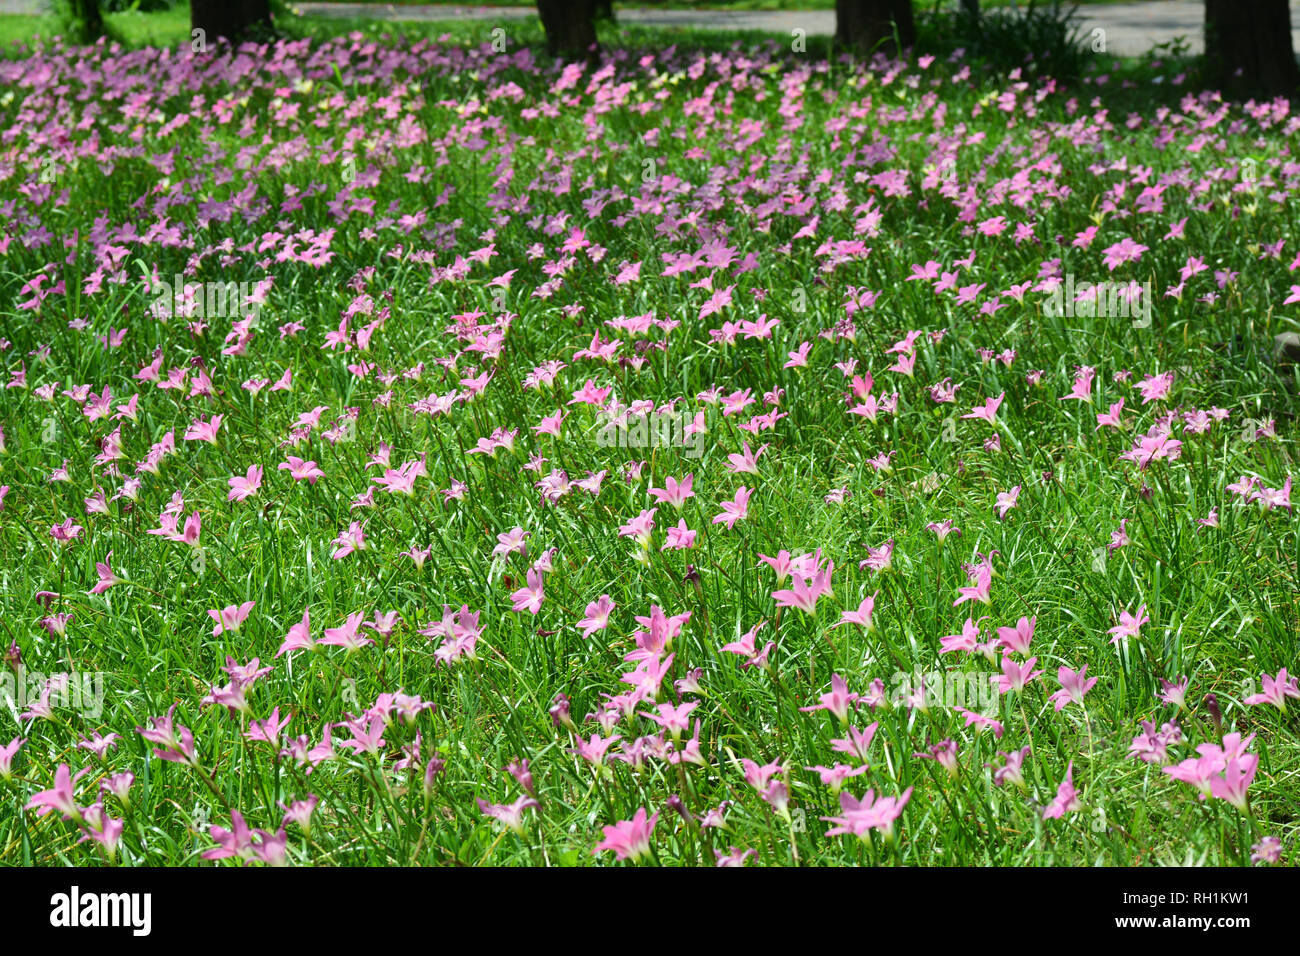 Zephyranthes Lily or Rain Lily in Queen Sirikit park, Bangkok, Thailand. Stock Photo